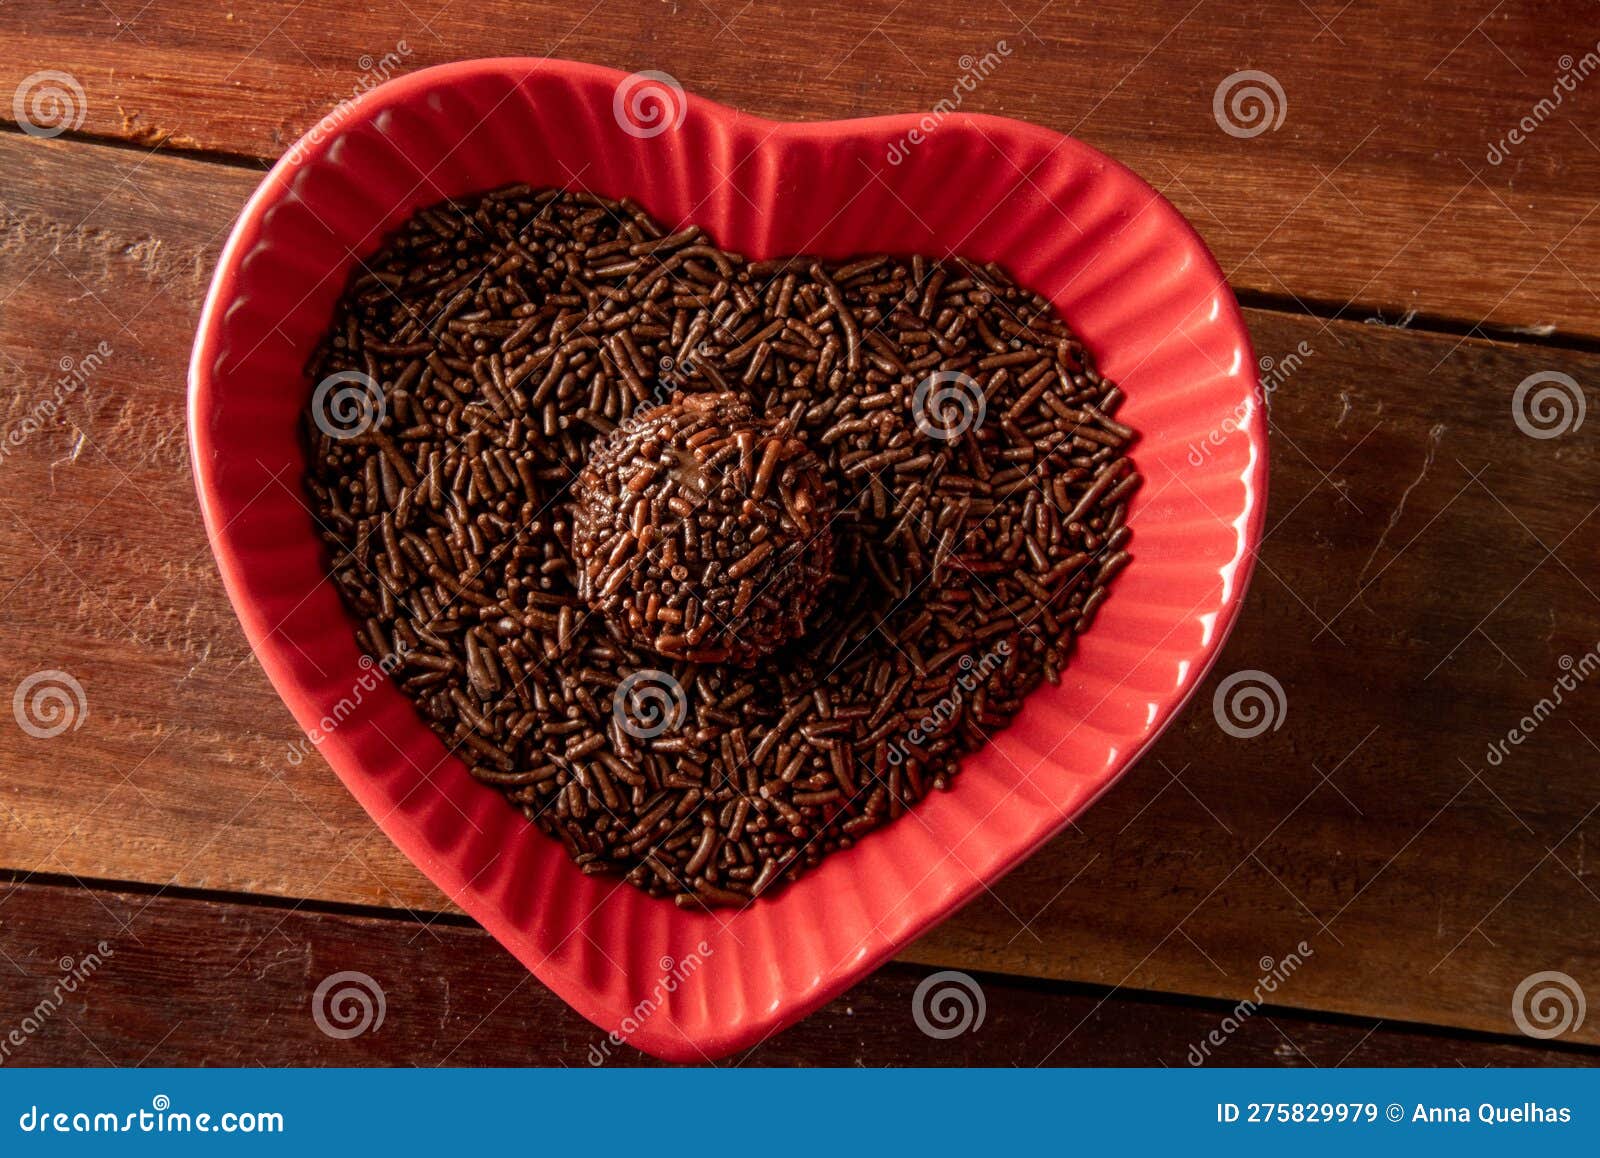 brigadeiro over a red heart d bowl and wooden background